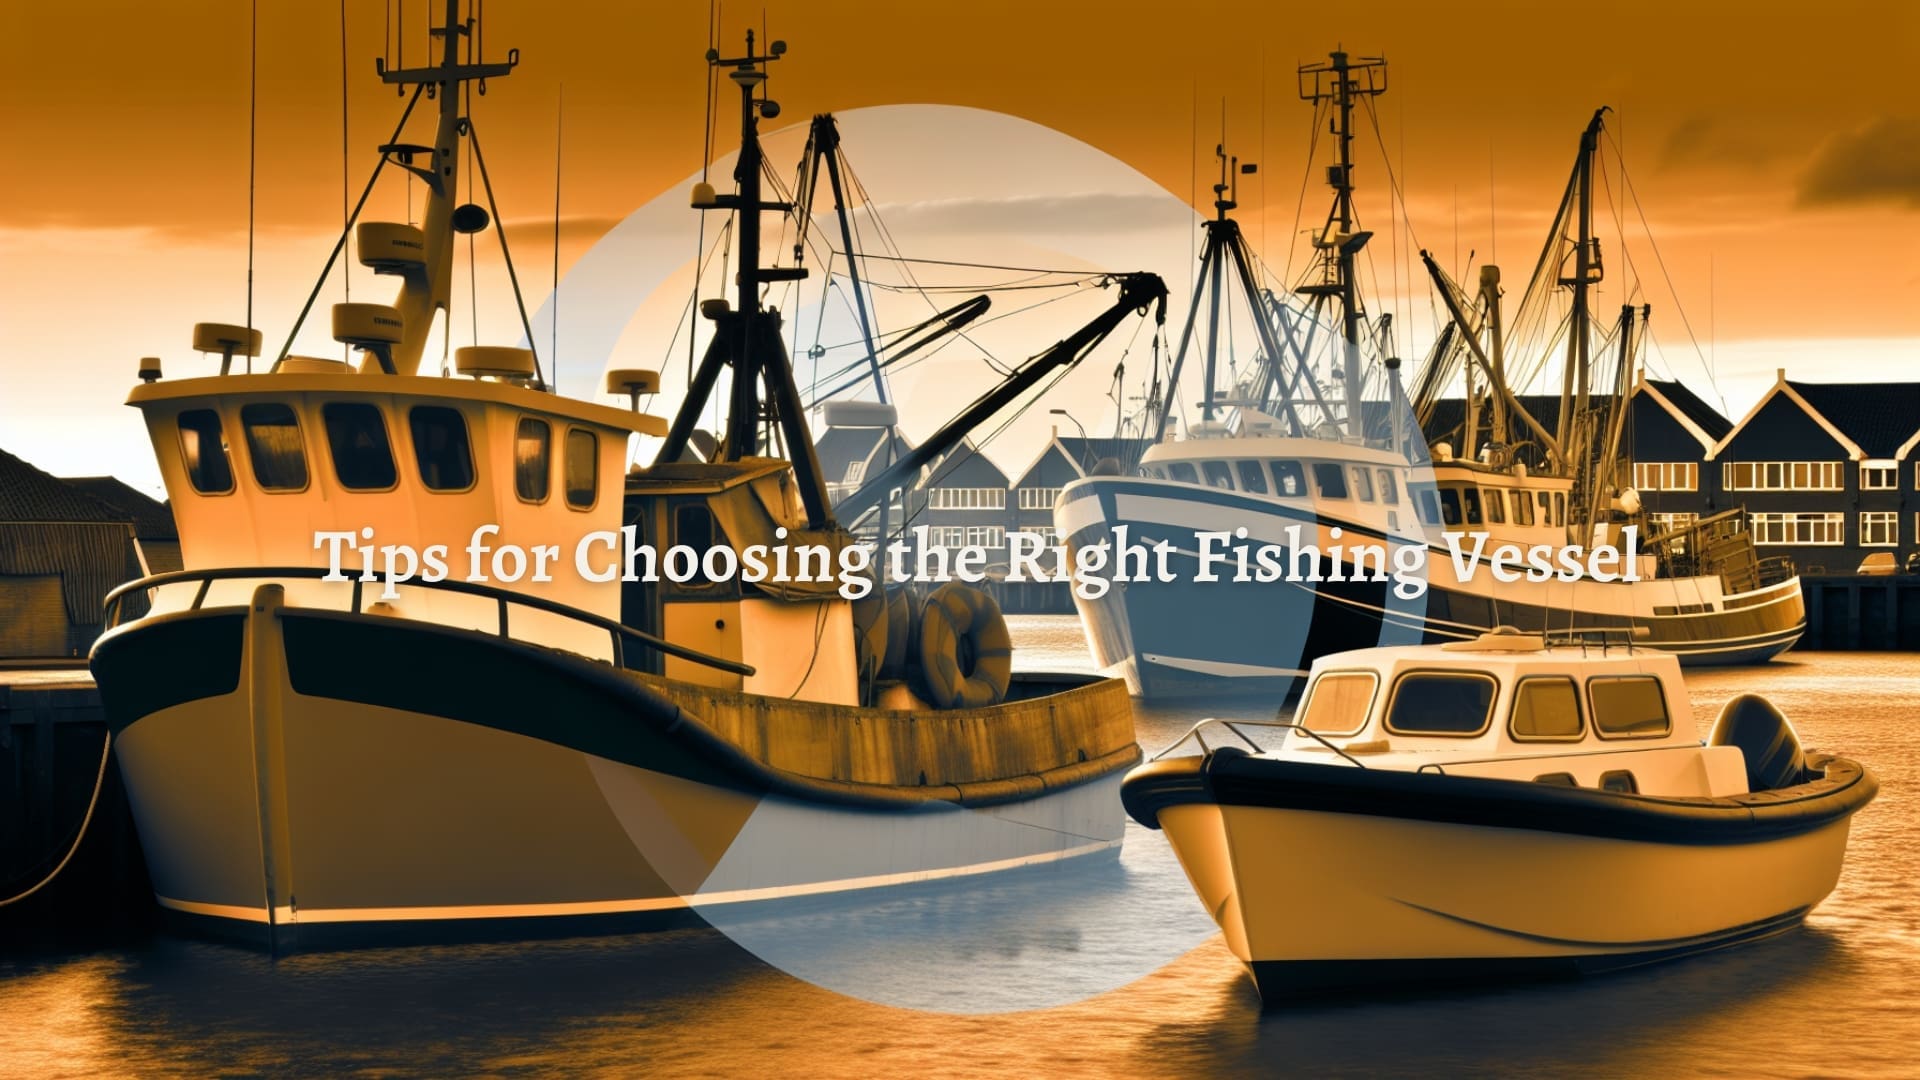 Tips for Choosing the Right Fishing Vessel